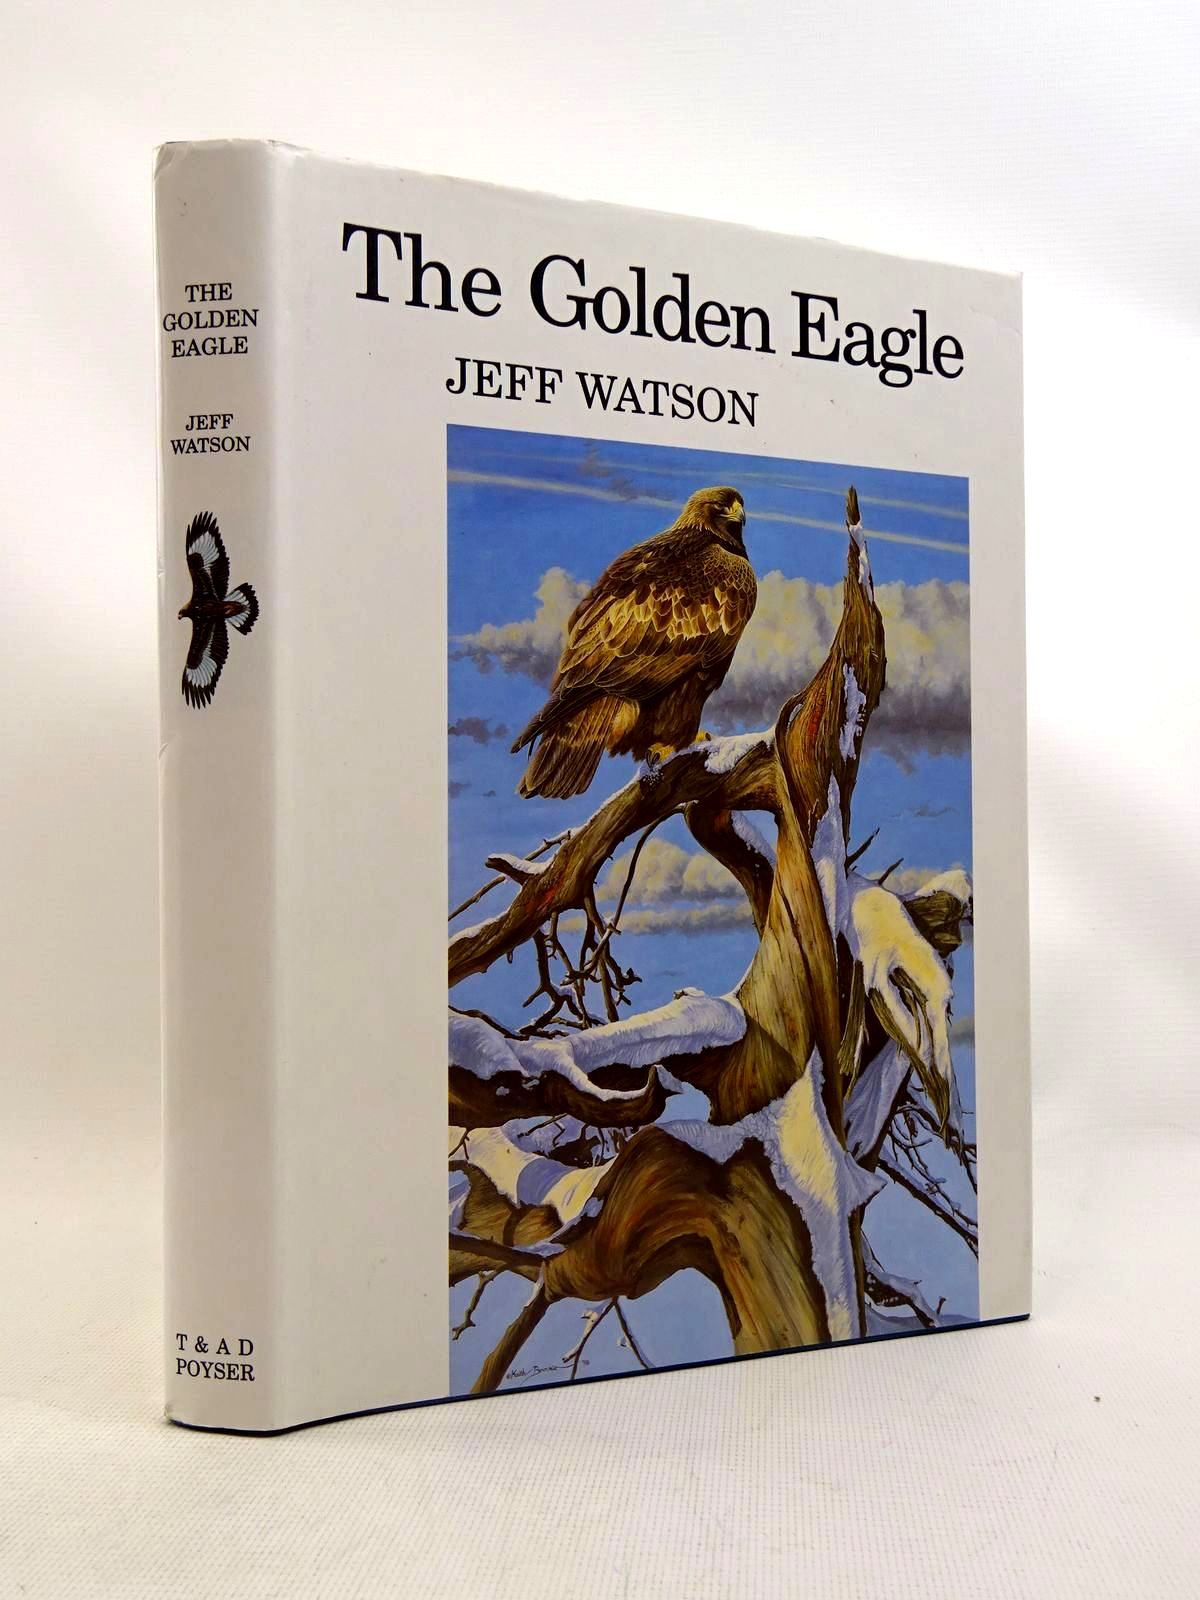 Photo of THE GOLDEN EAGLE written by Watson, Jeff illustrated by Brockie, Keith
Watson, Donald published by T. & A.D. Poyser (STOCK CODE: 1317550)  for sale by Stella & Rose's Books